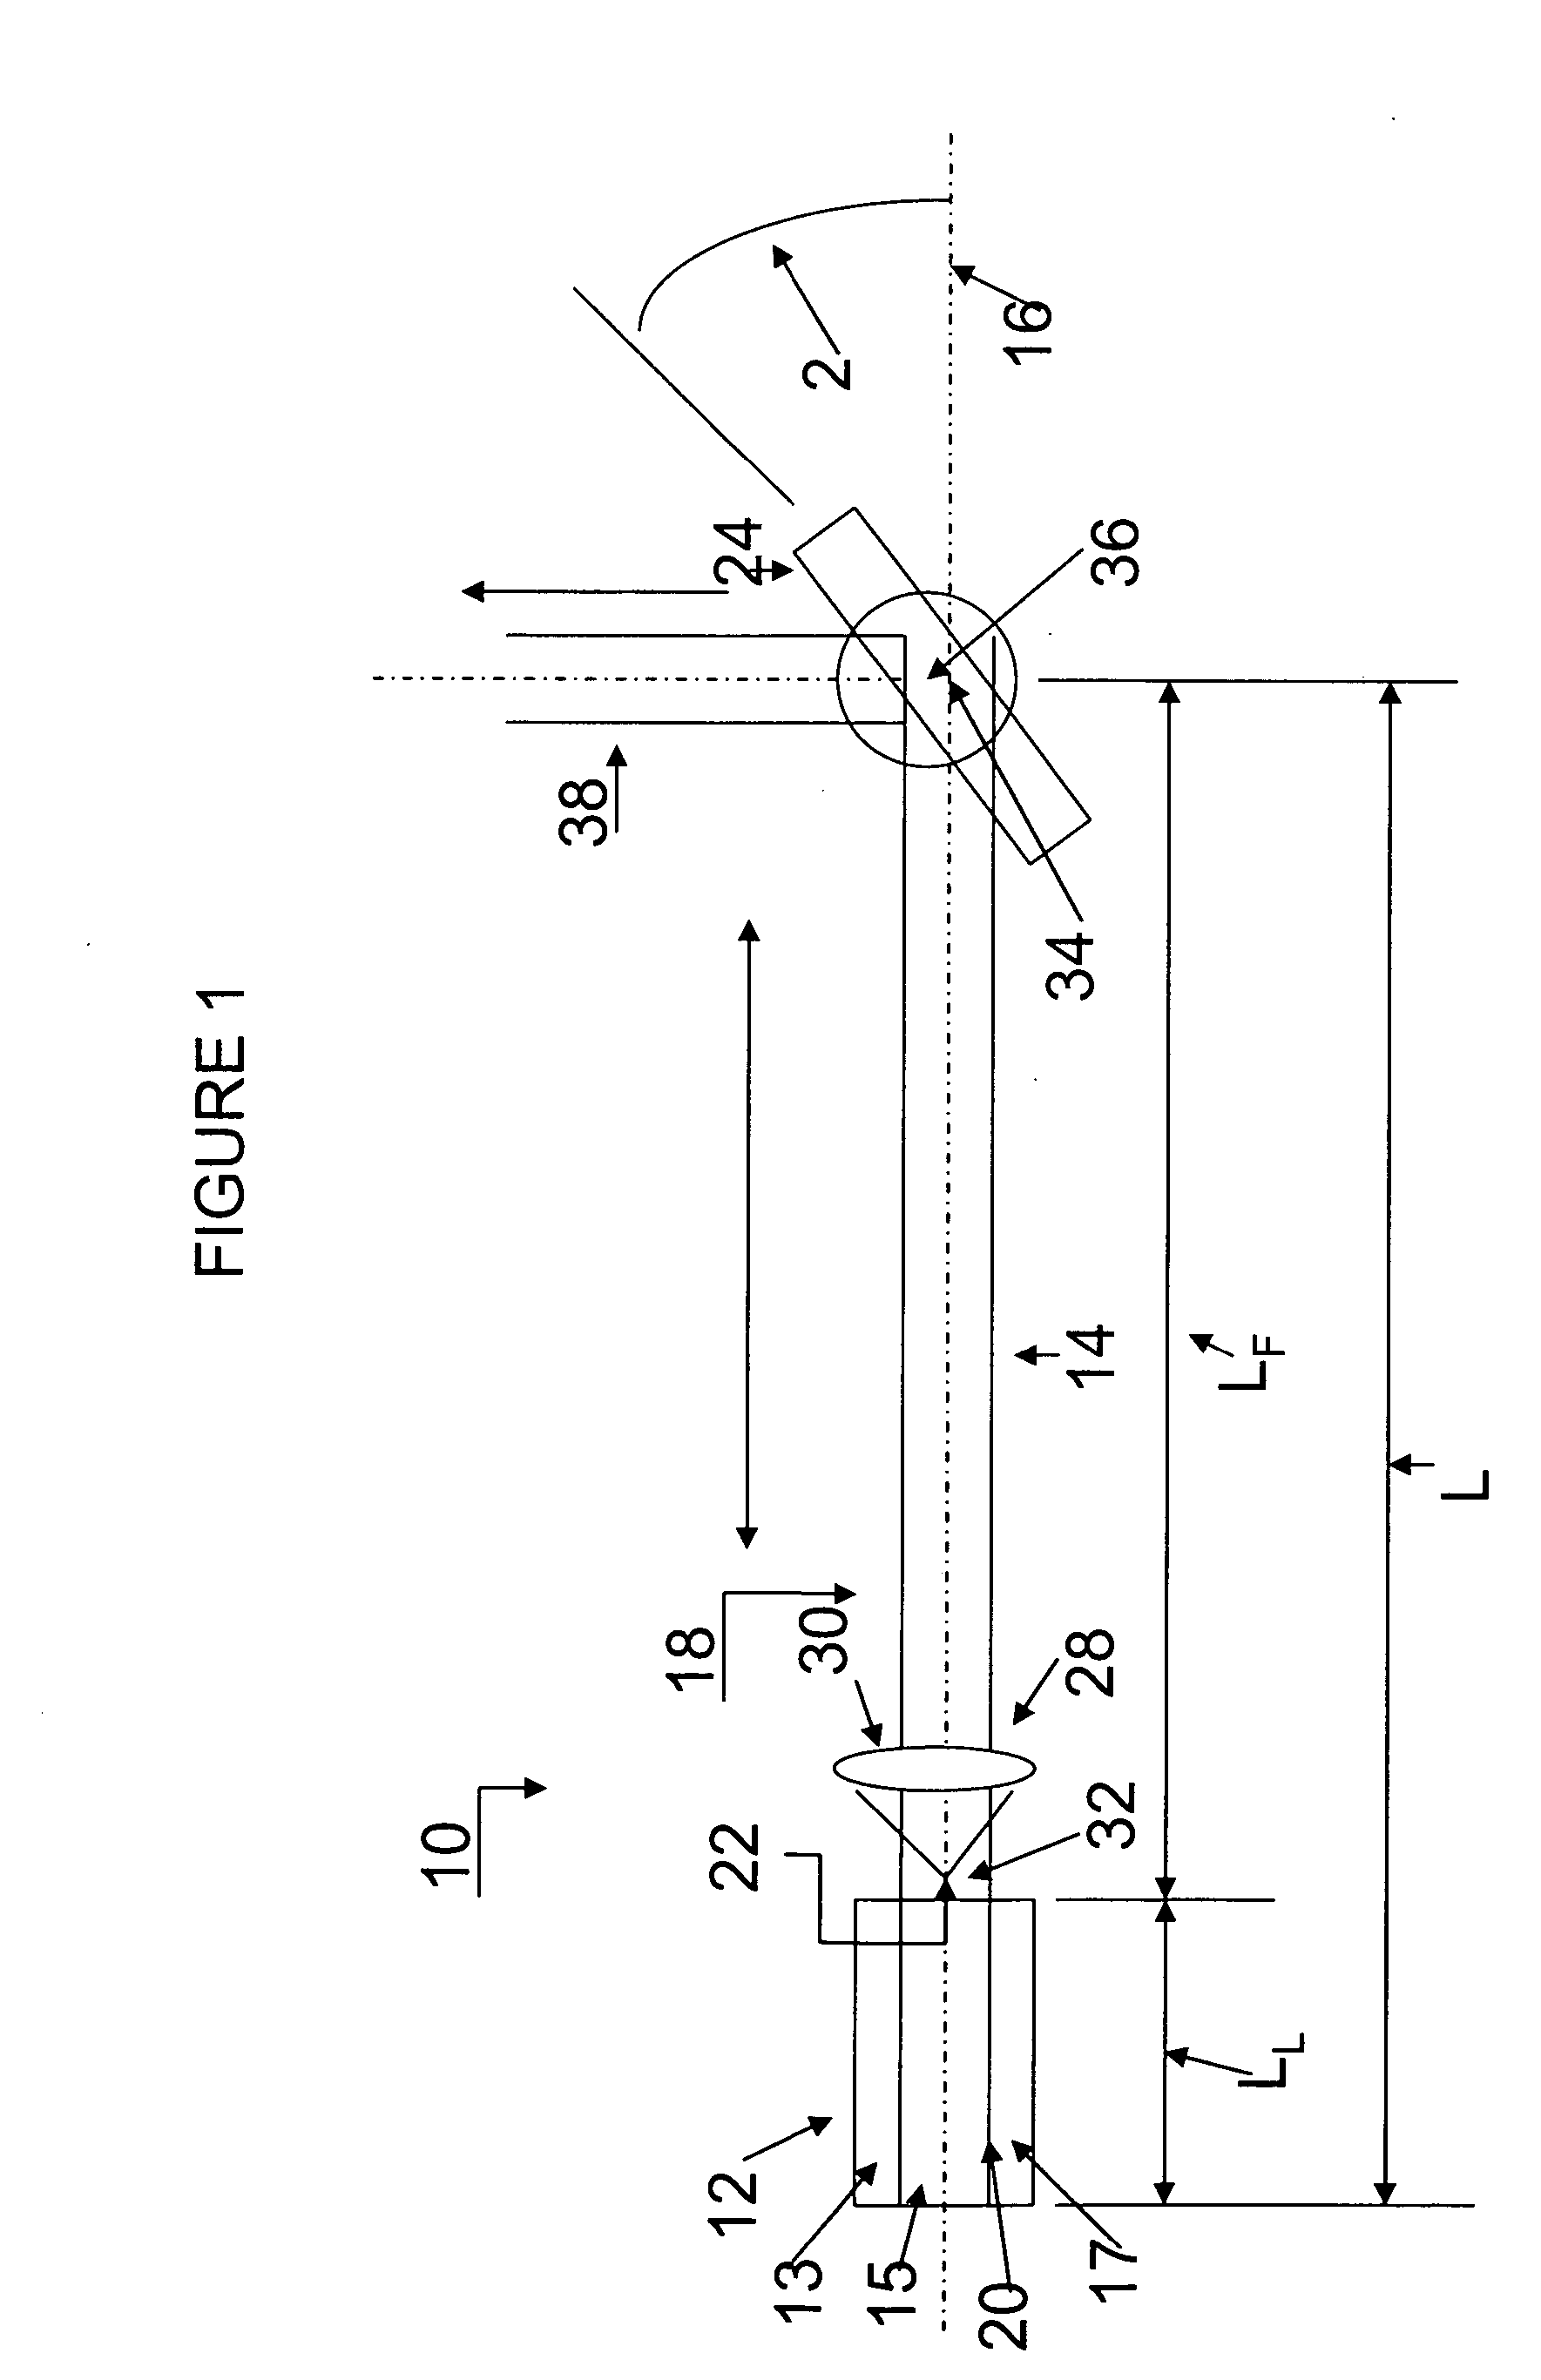 Mode-matching system for tunable external cavity laser